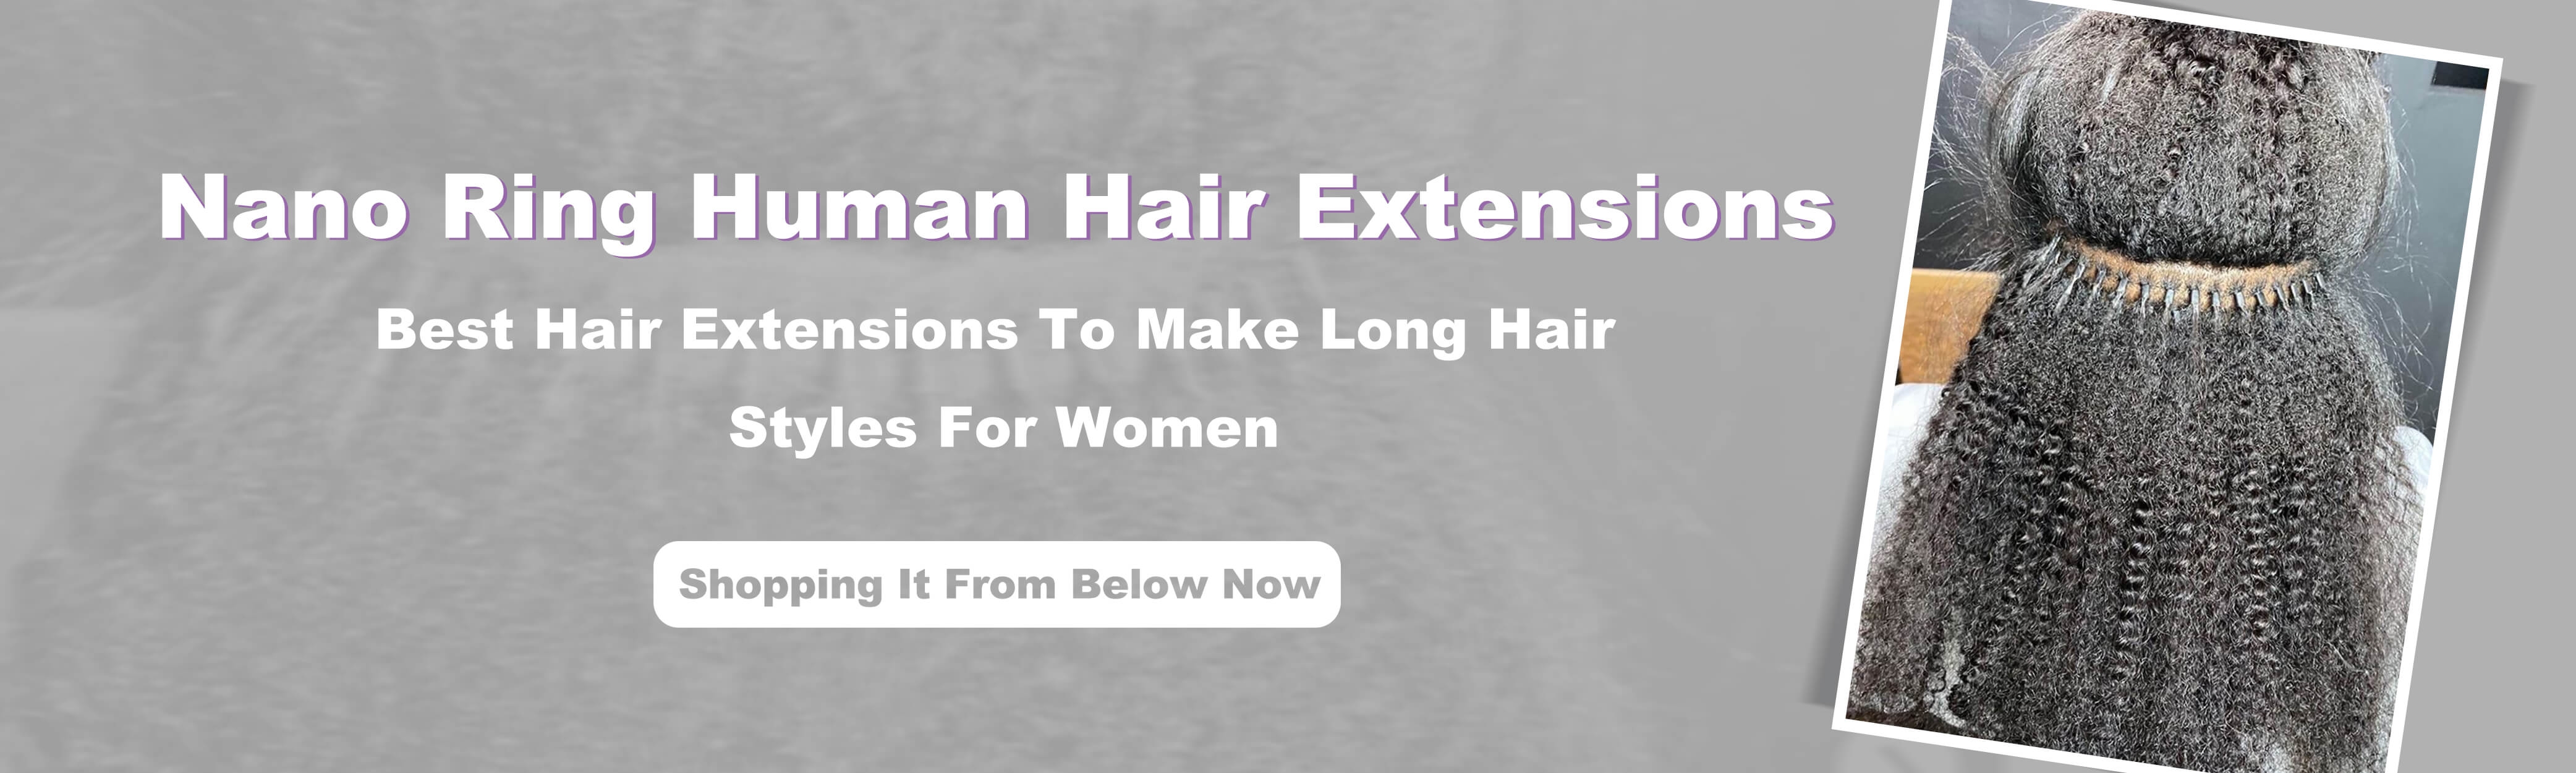 I Tip Hair Extensions